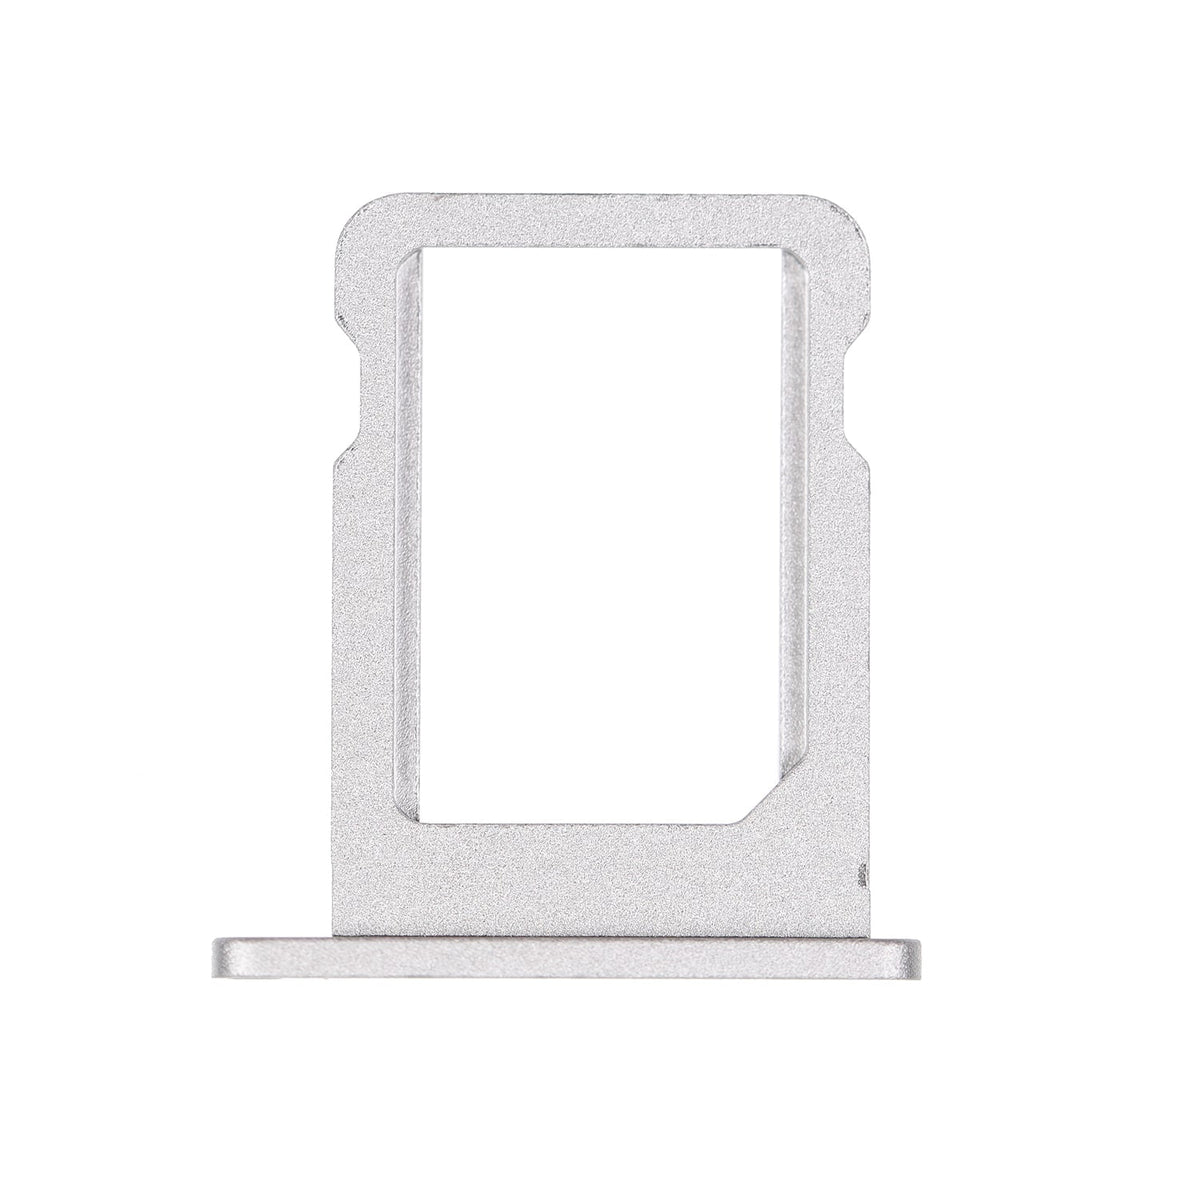 SILVER SIM CARD TRAY FOR IPAD PRO 12.9" 3RD